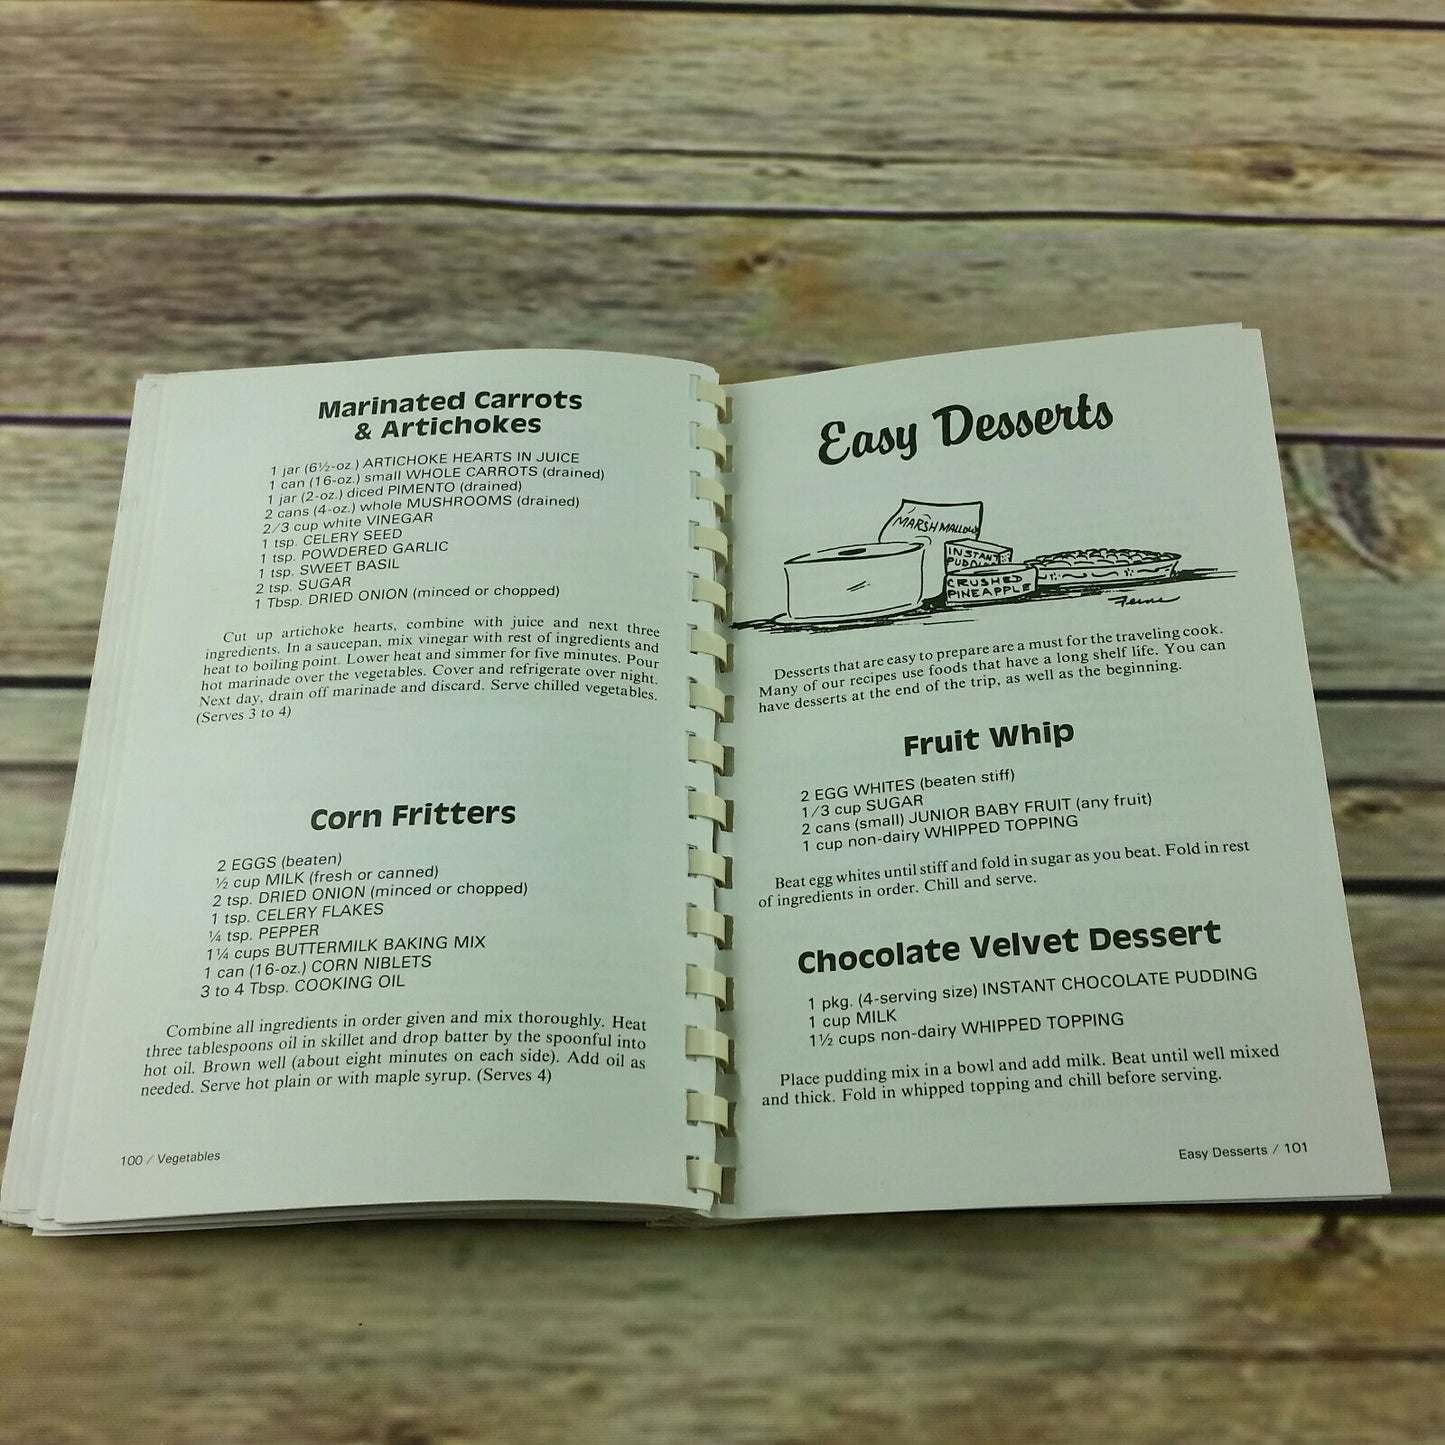 Travel Cookbook Easy RV Recipes For the Traveling Cook Spiral Bound Ferne Holmes 1997 Spiral Bound - At Grandma's Table